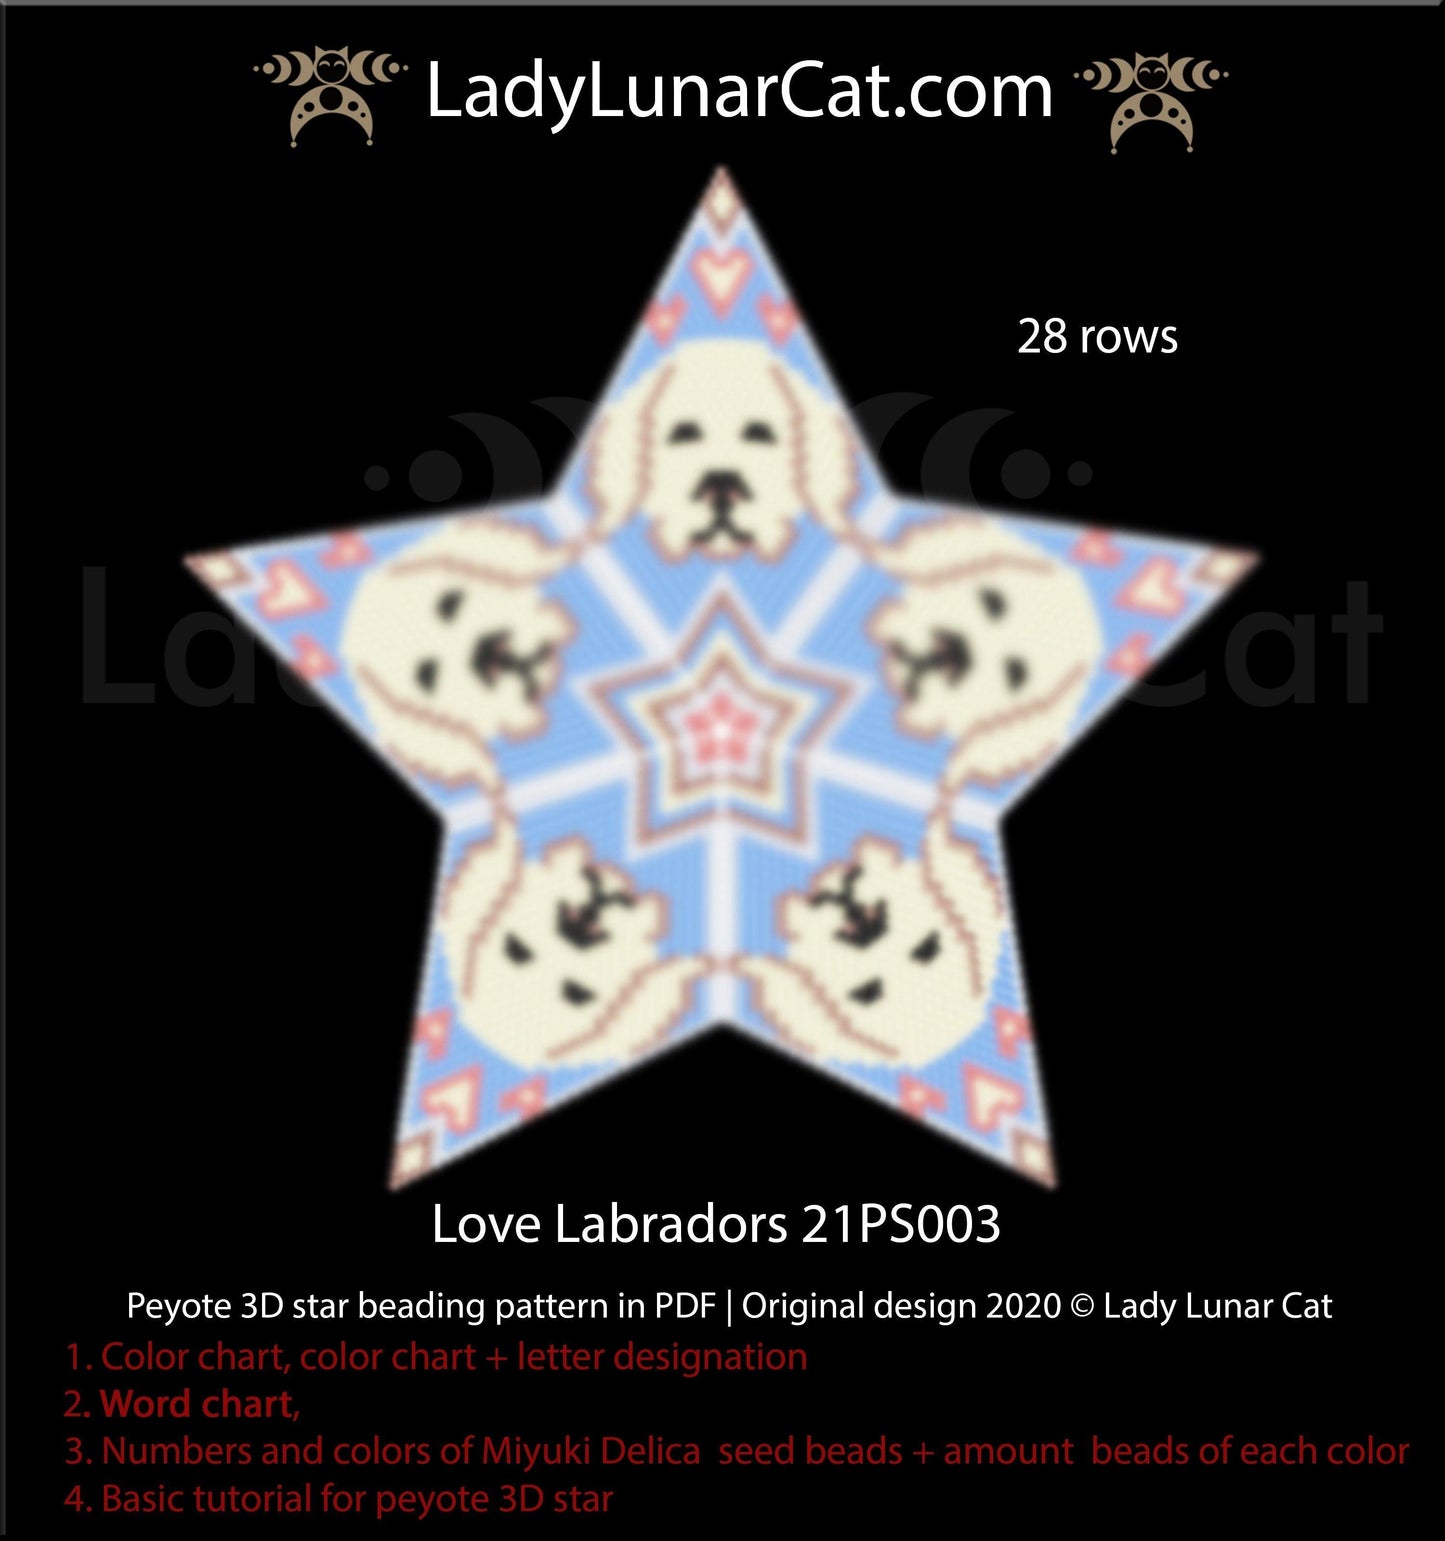 Beaded star pattern - Love Labradors 21PS003 | Seed beads tutorial for 3D peyote star LadyLunarCat